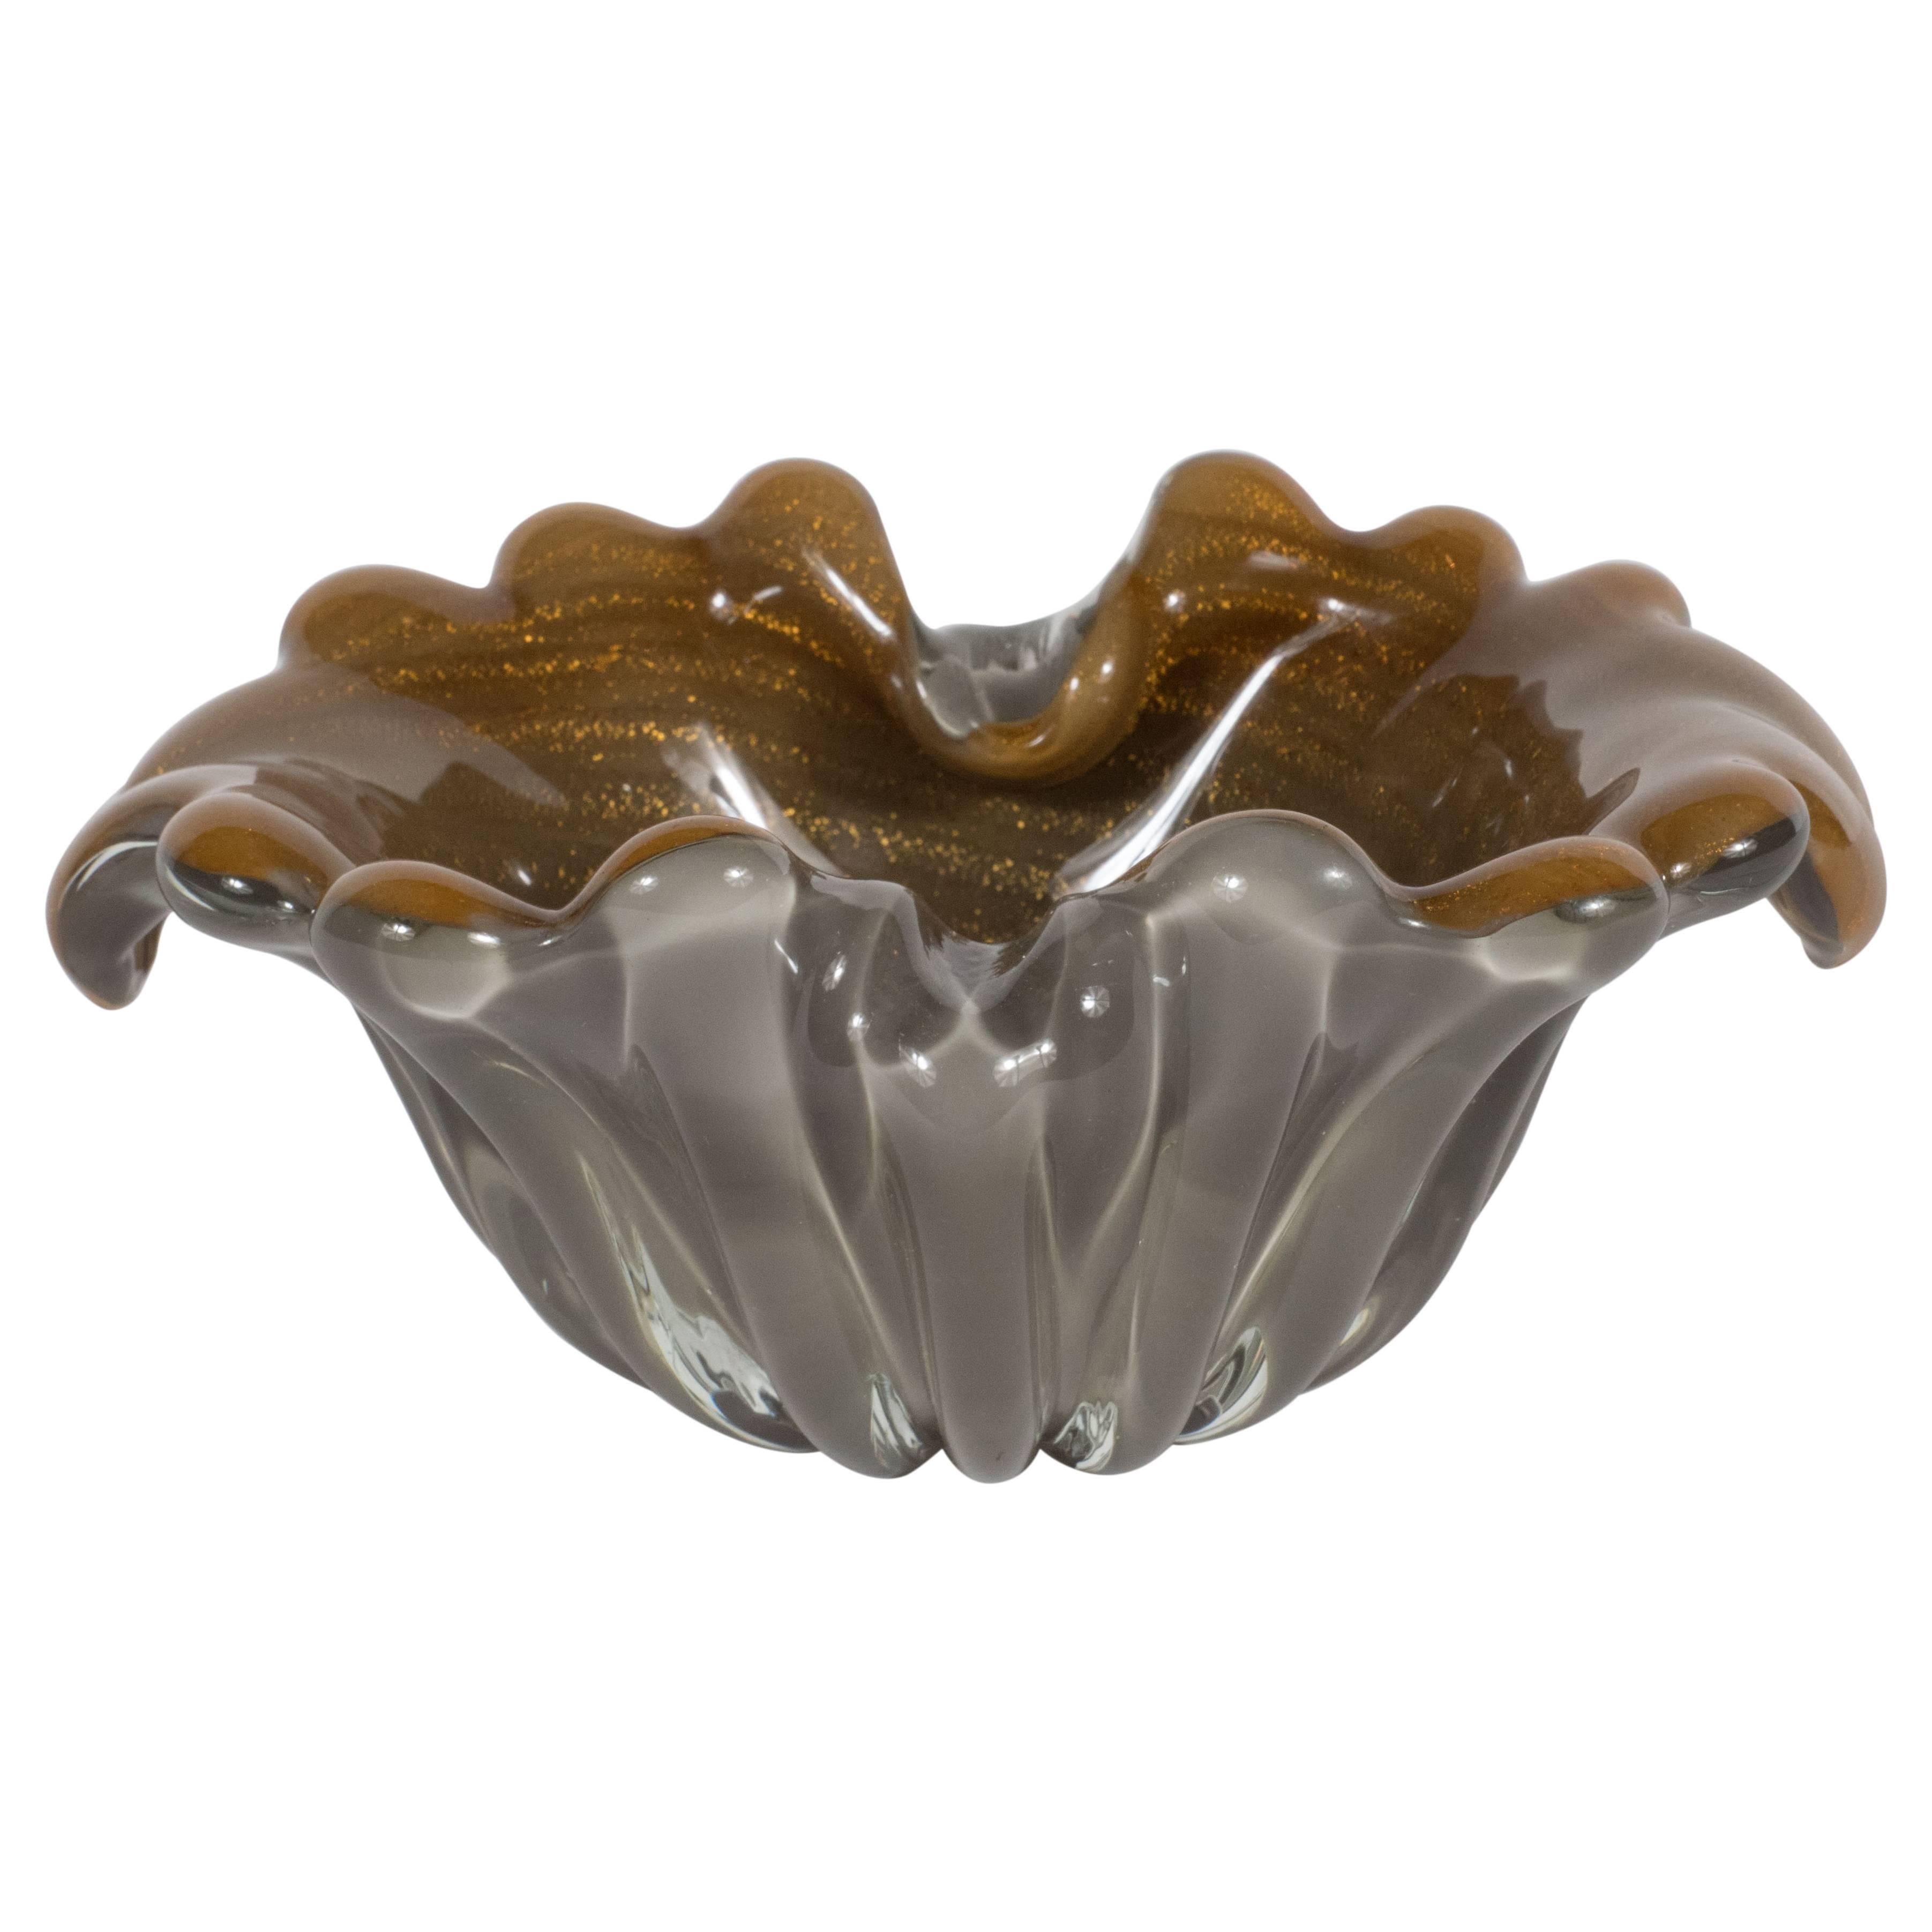 Mid-Century Modern Handblown Murano Bowl in Hues of Antique Bronze & Pewter